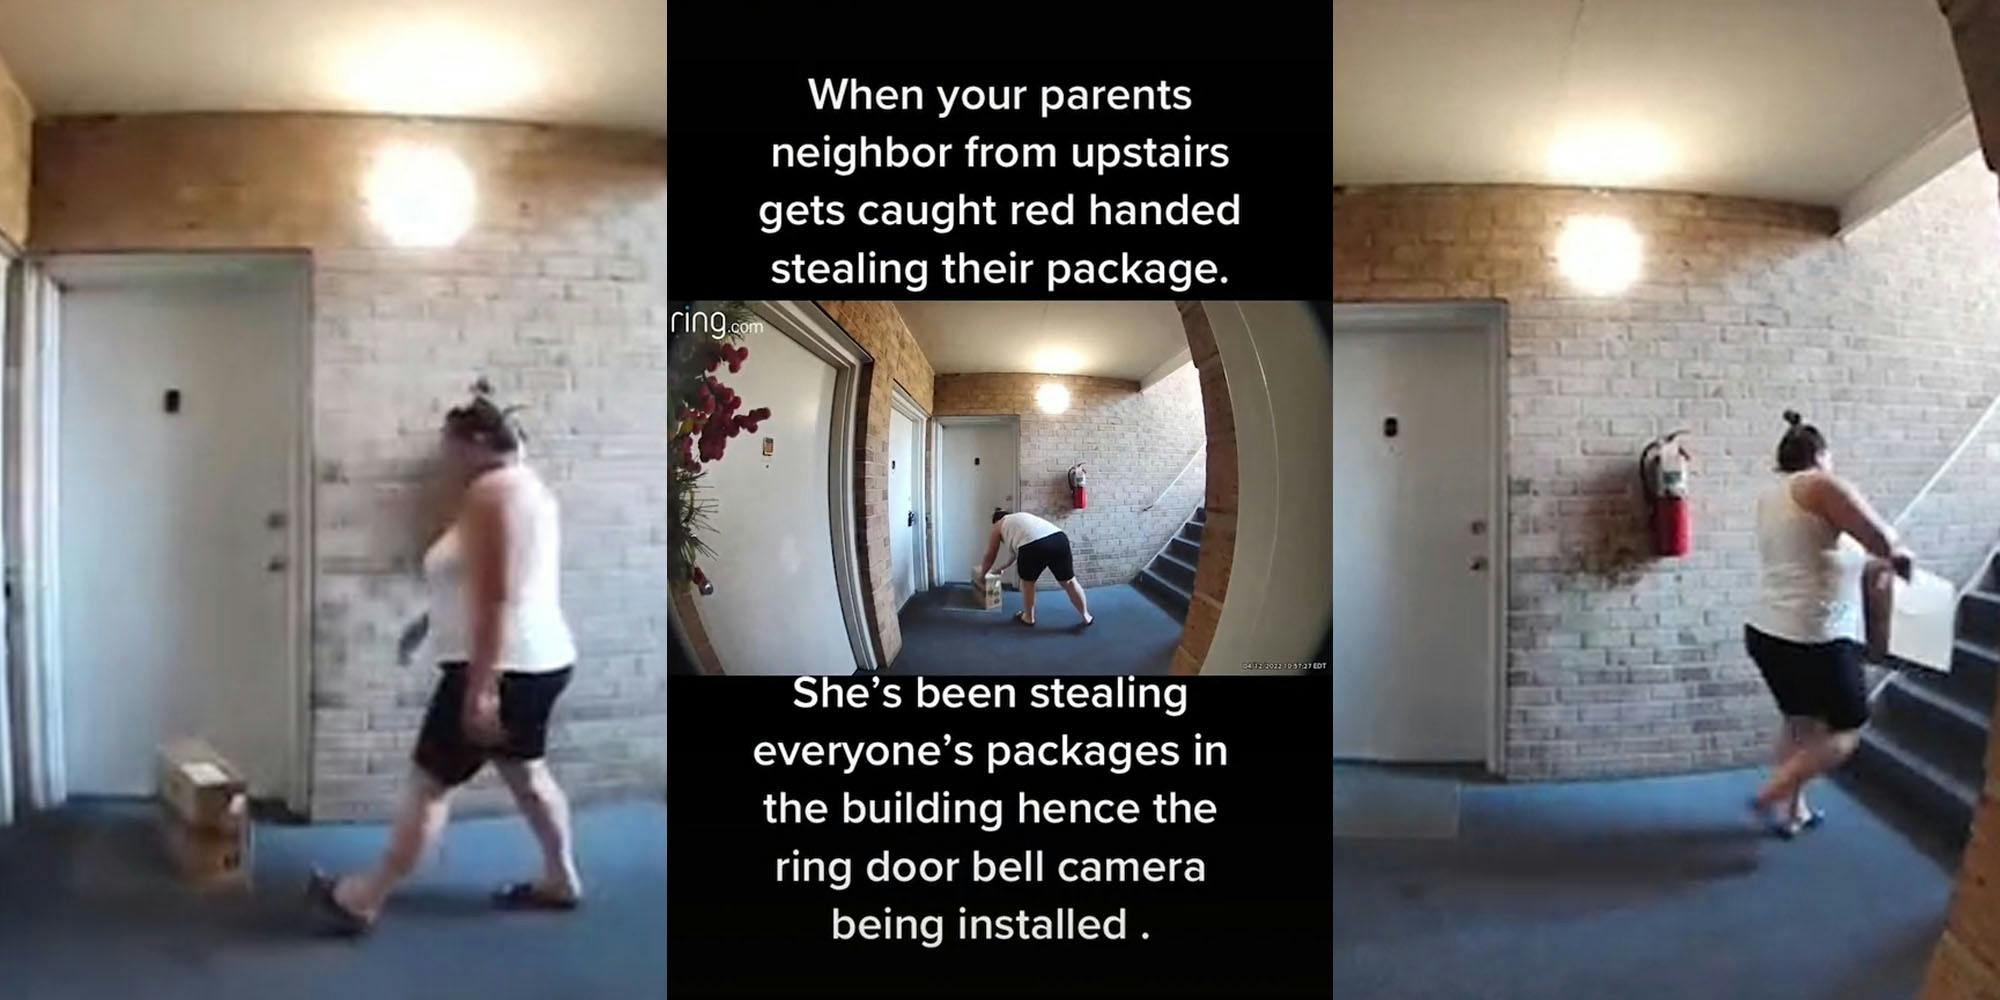 Woman from security footage walking up to package outside neighbors door (l) Woman bending over stealing package caption "When your parents neighbor from upstairs gets caught red handed stealing their package. She's been stealing packages in the building hence the ring bell camera being installed." (c) woman on security footage walking away up the stairs with neighbors package in hand (r)